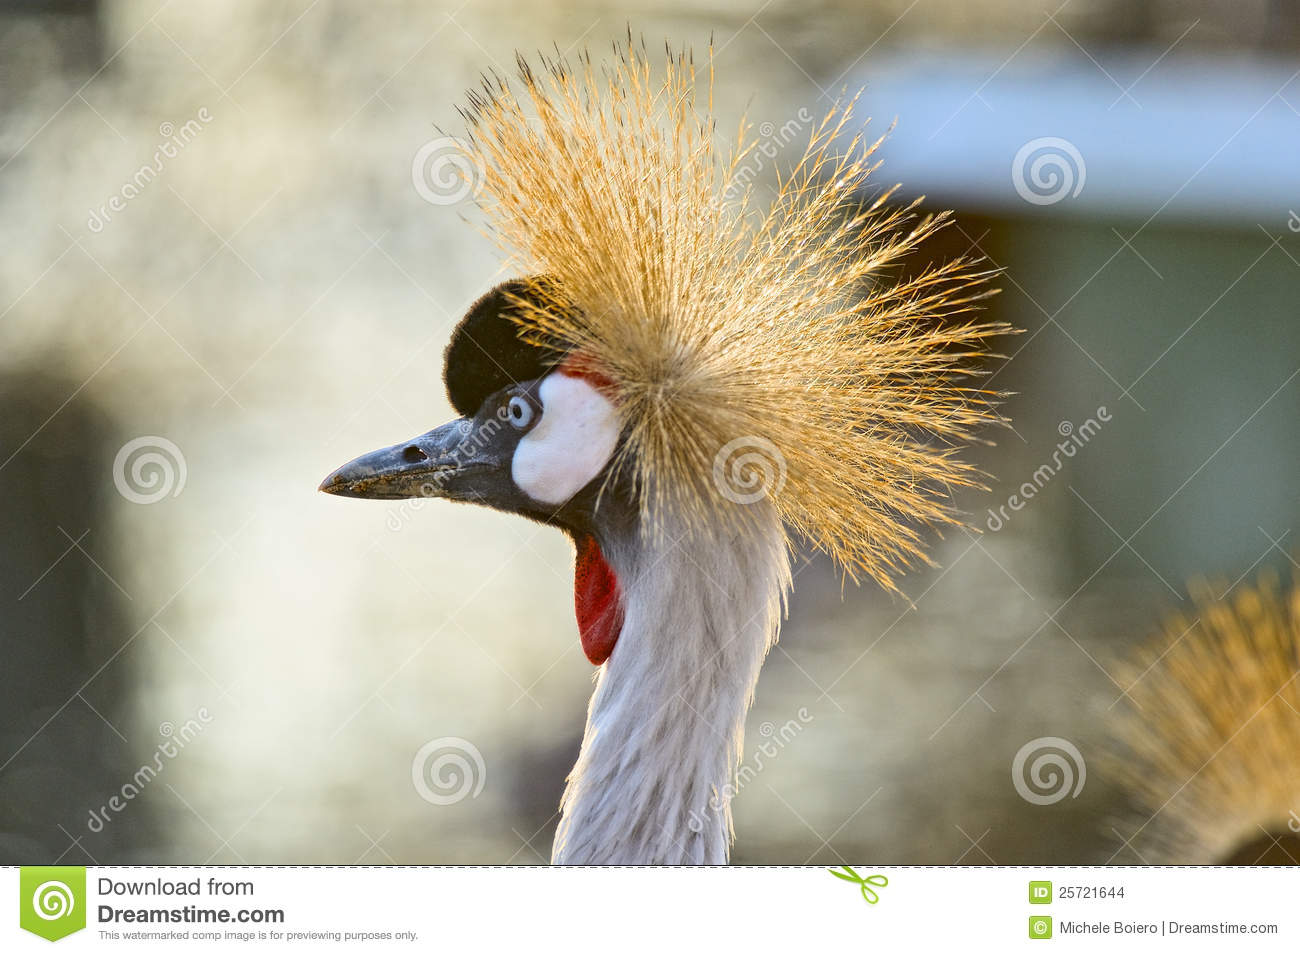 Bird With Long Neck Stock Images   Image  25721644